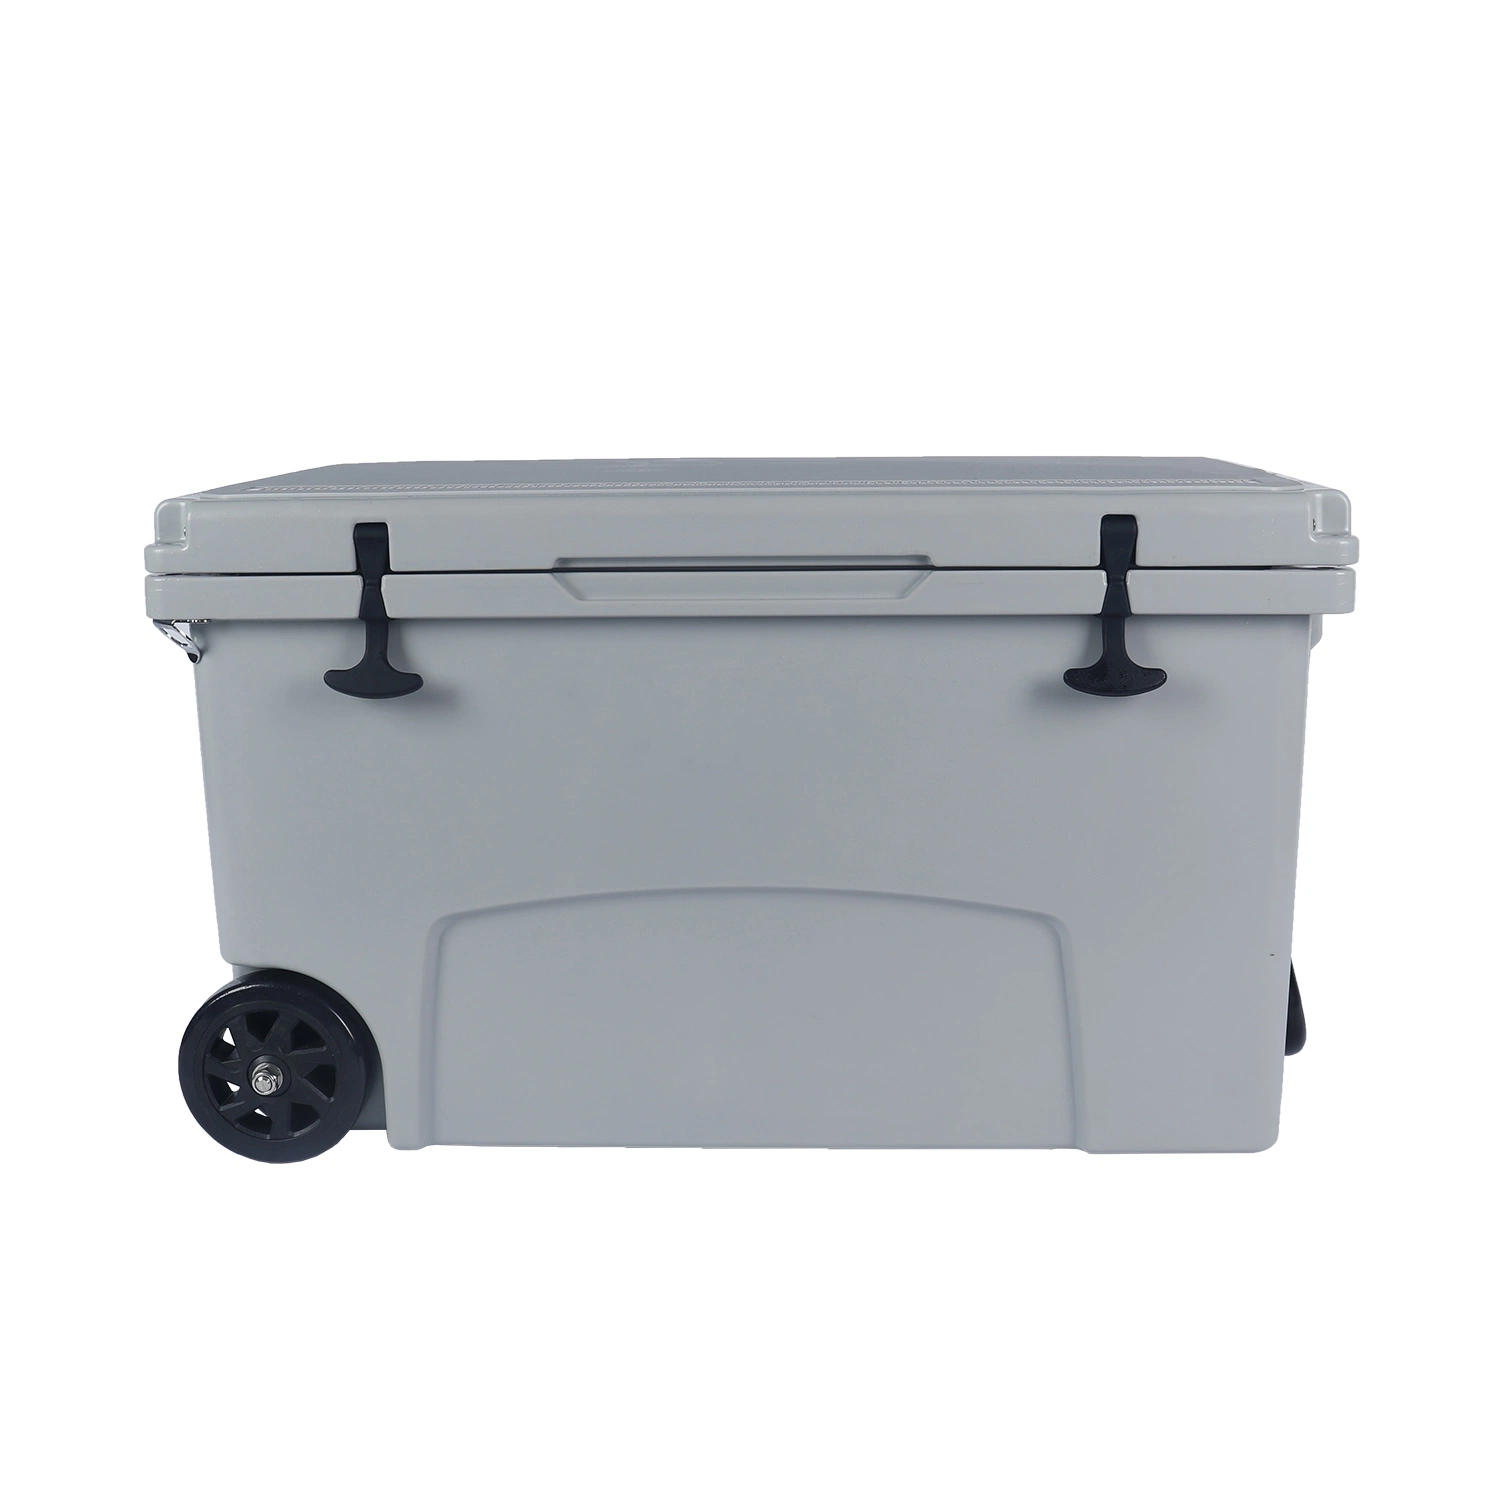 Factory Customized Food Wholesale Cheap Roto Mold Cooler Box 75L/125L/145L Trolley Cooler Box Price Plastic Insulated Cooler Box with Wheels for Beer/Can/Camp